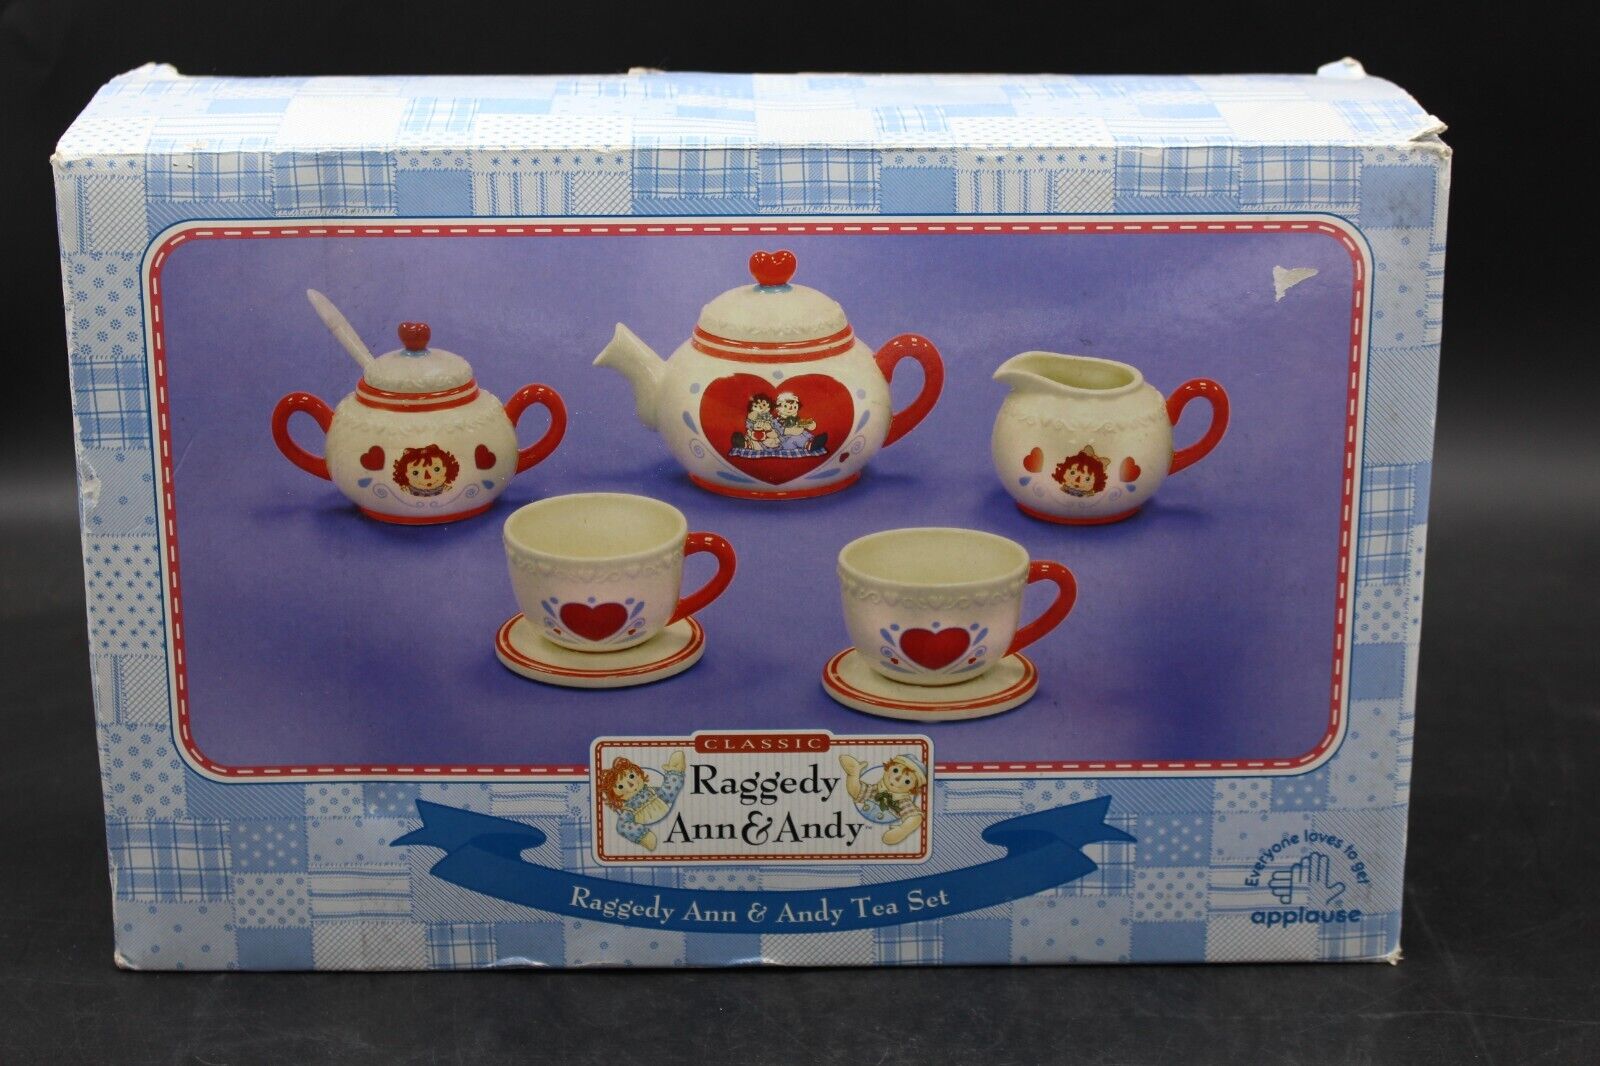 Applause Classic Raggedy Ann And Andy Tea Set 38186